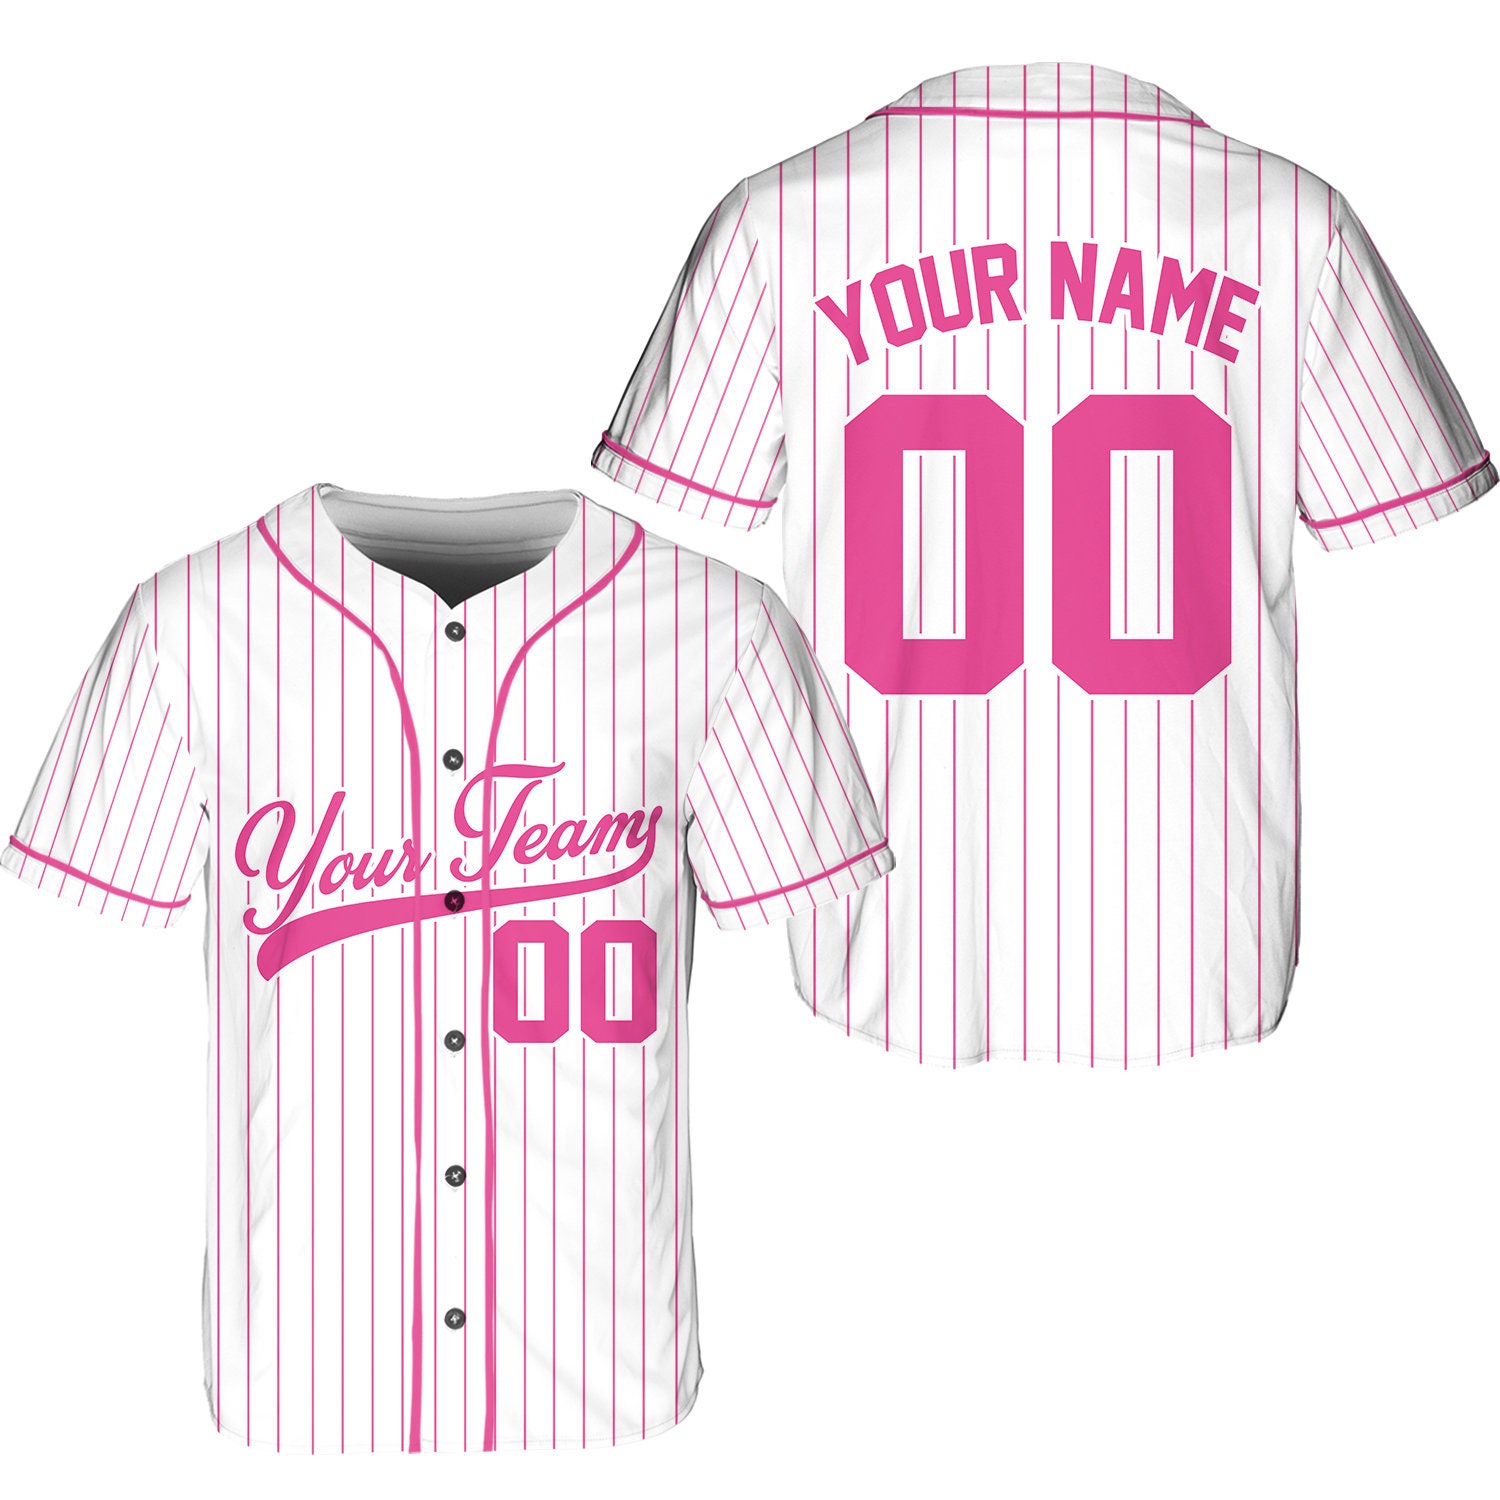  Custom Baseball City Night Skyline Jerseys 3D Printing  Personalize Your Name& Number for Fans Gifts Jersey Men Women Youth S-5XL  Blue 